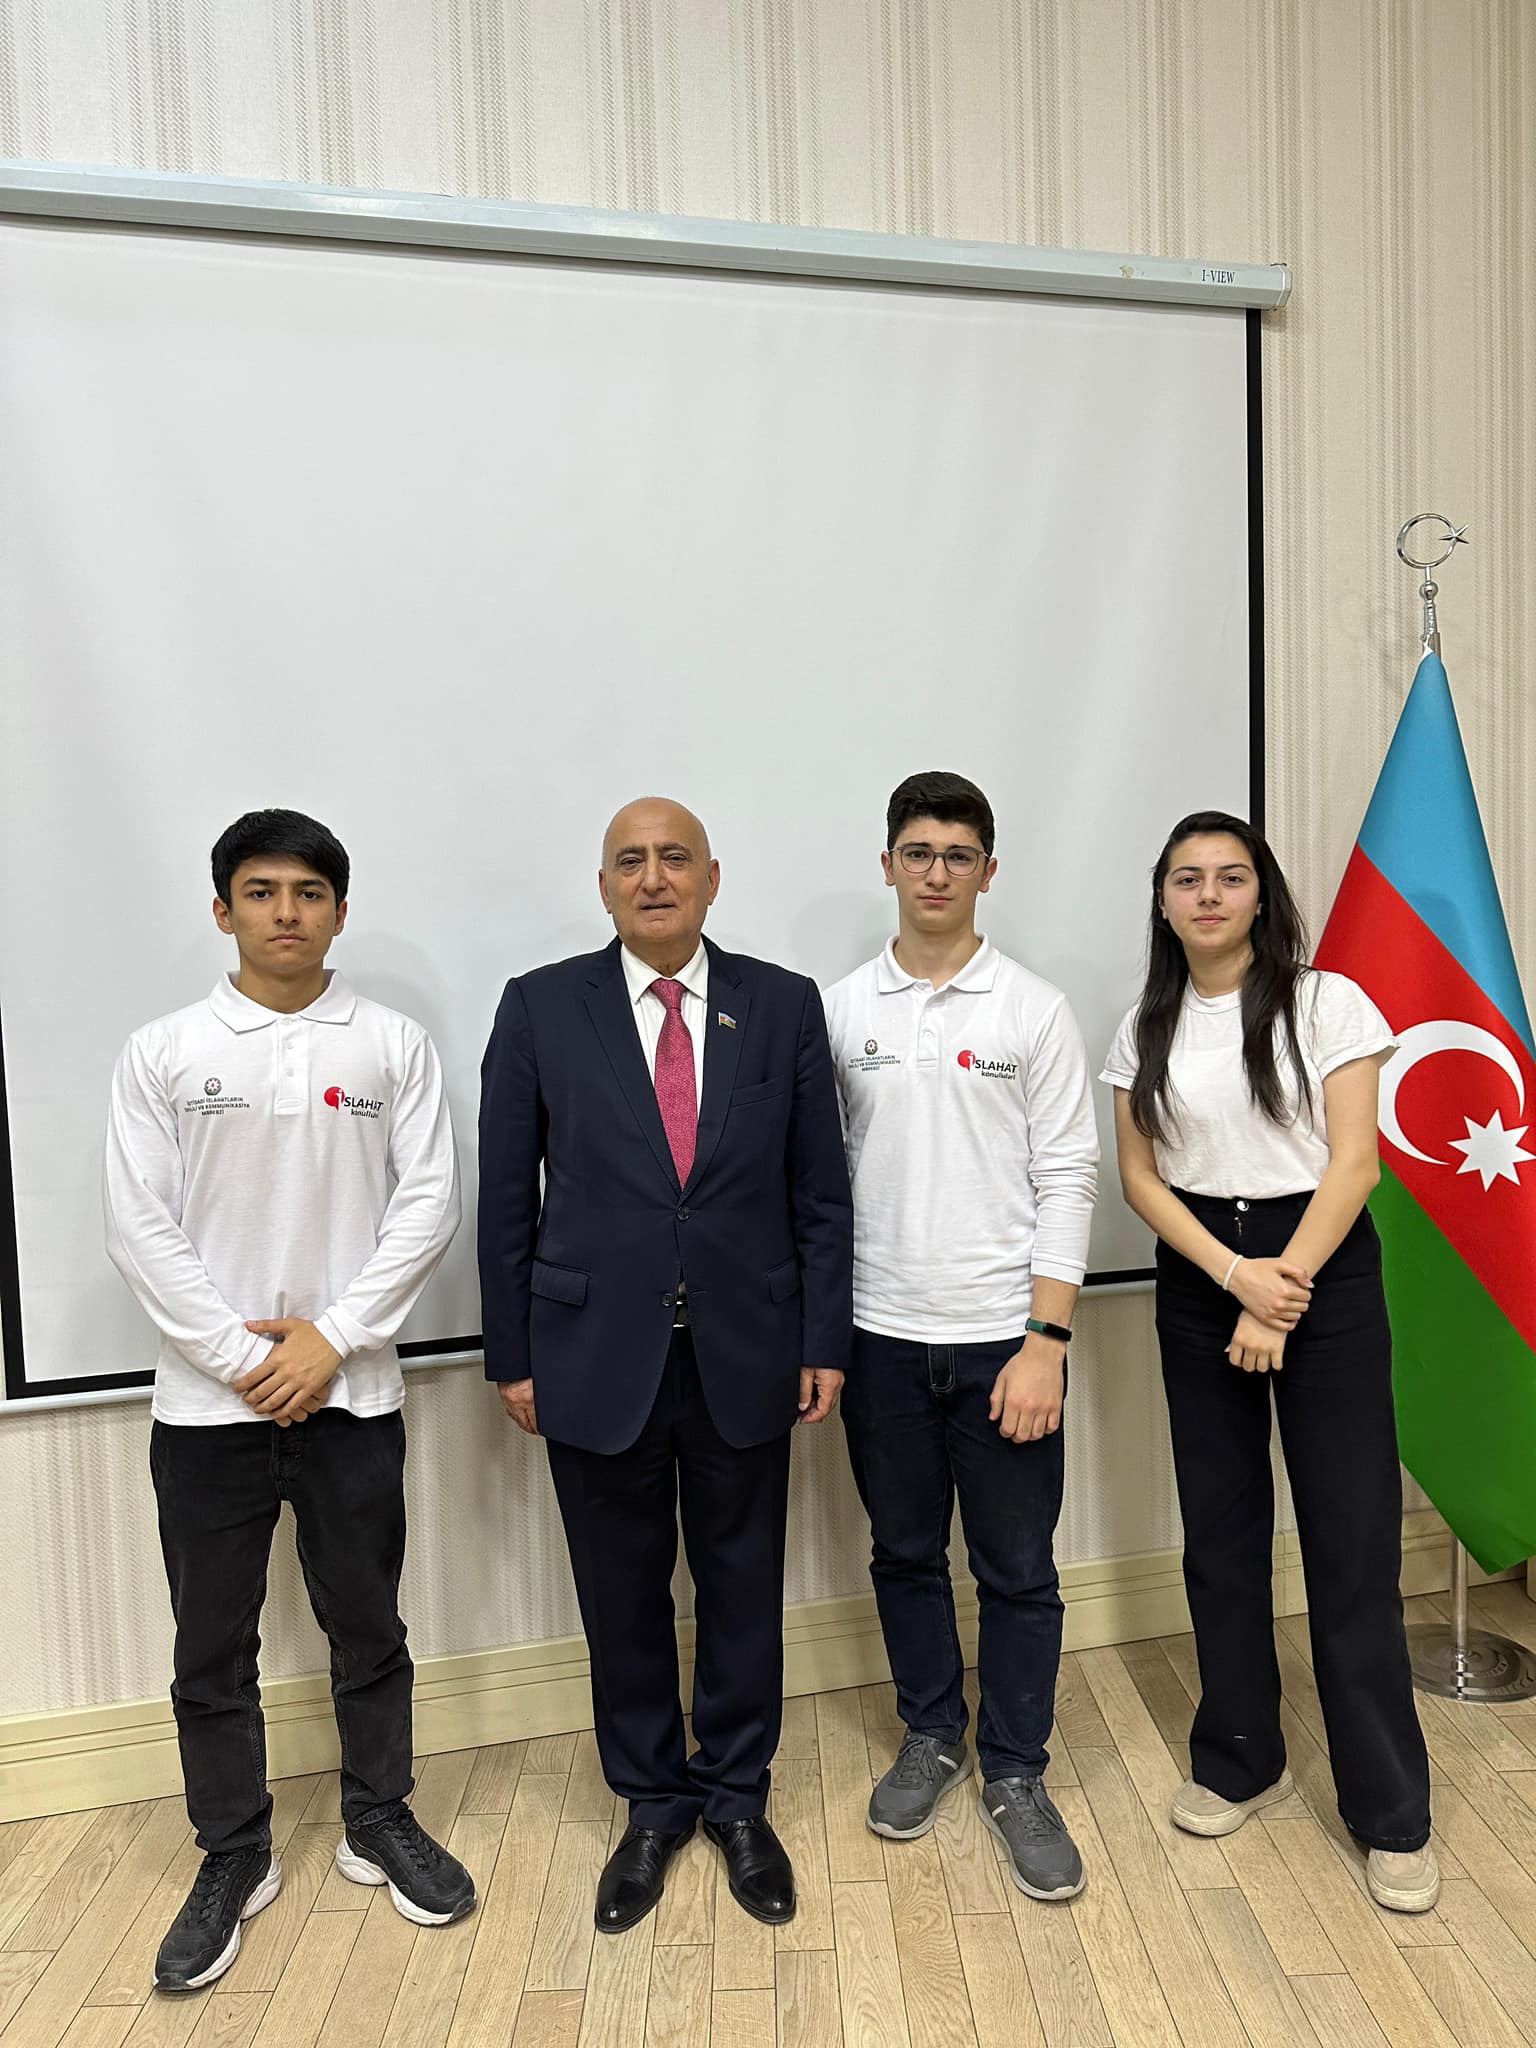 Reform Volunteers participated in the presentation "Azerbaijanism and national interests"